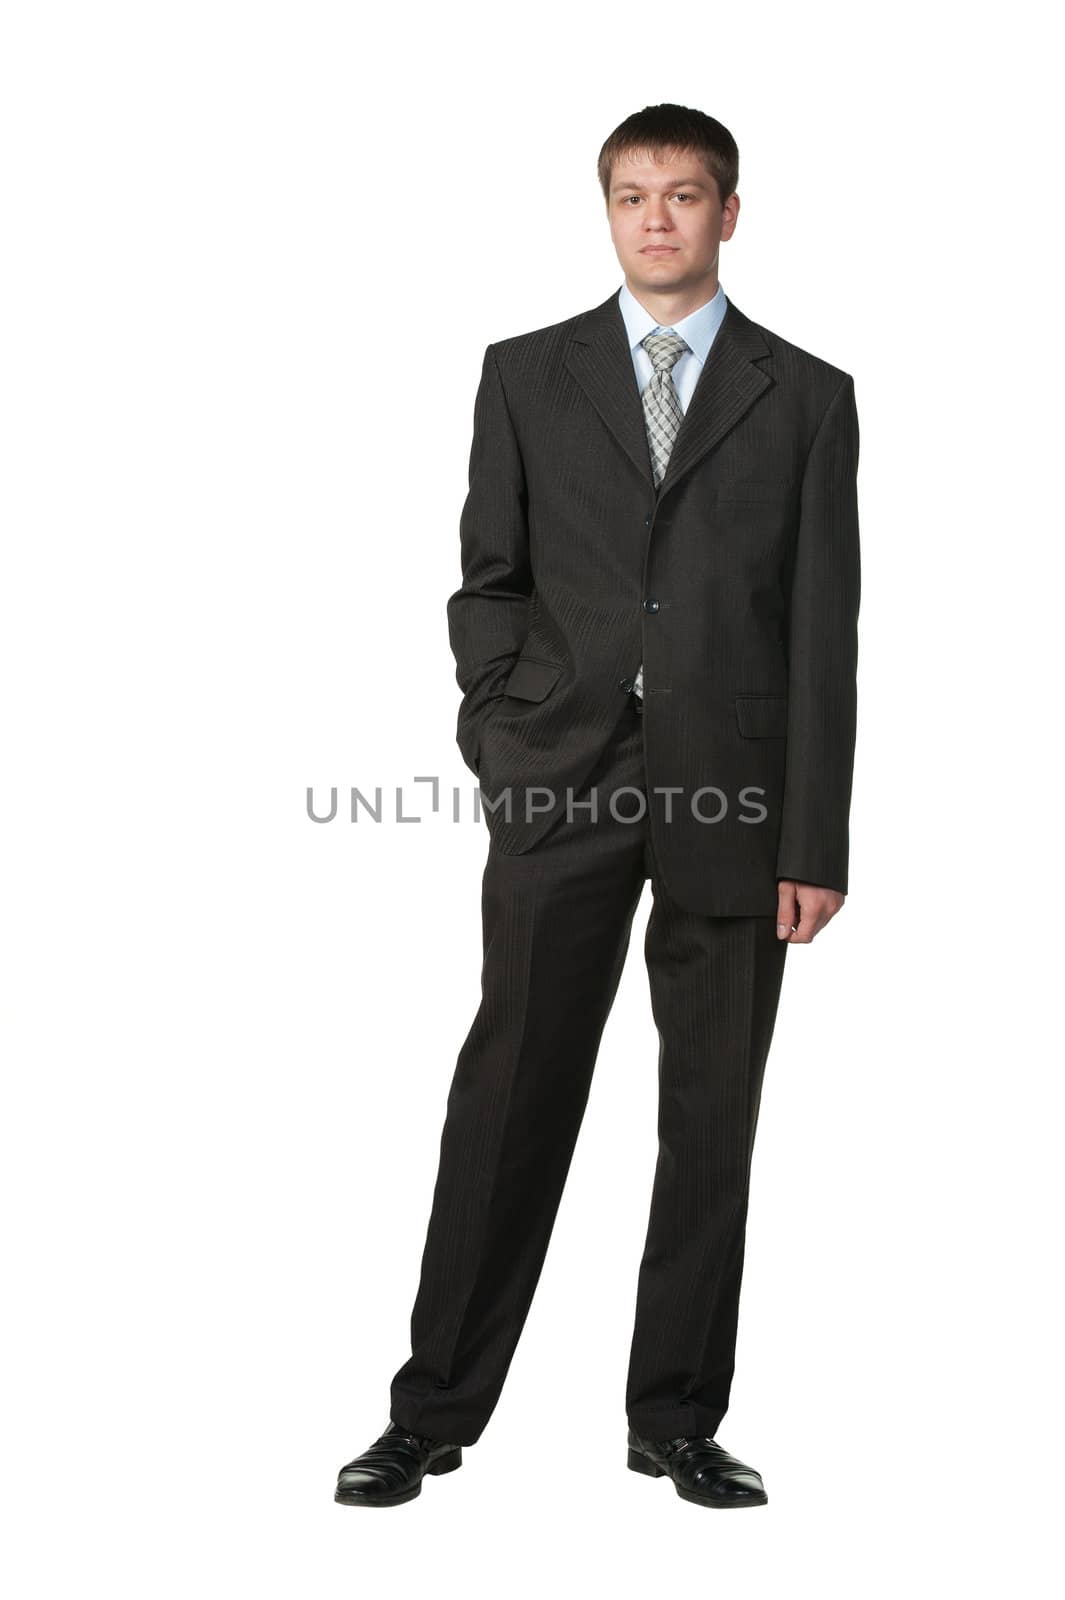 The young businessman in a suit. It is isolated on a white background